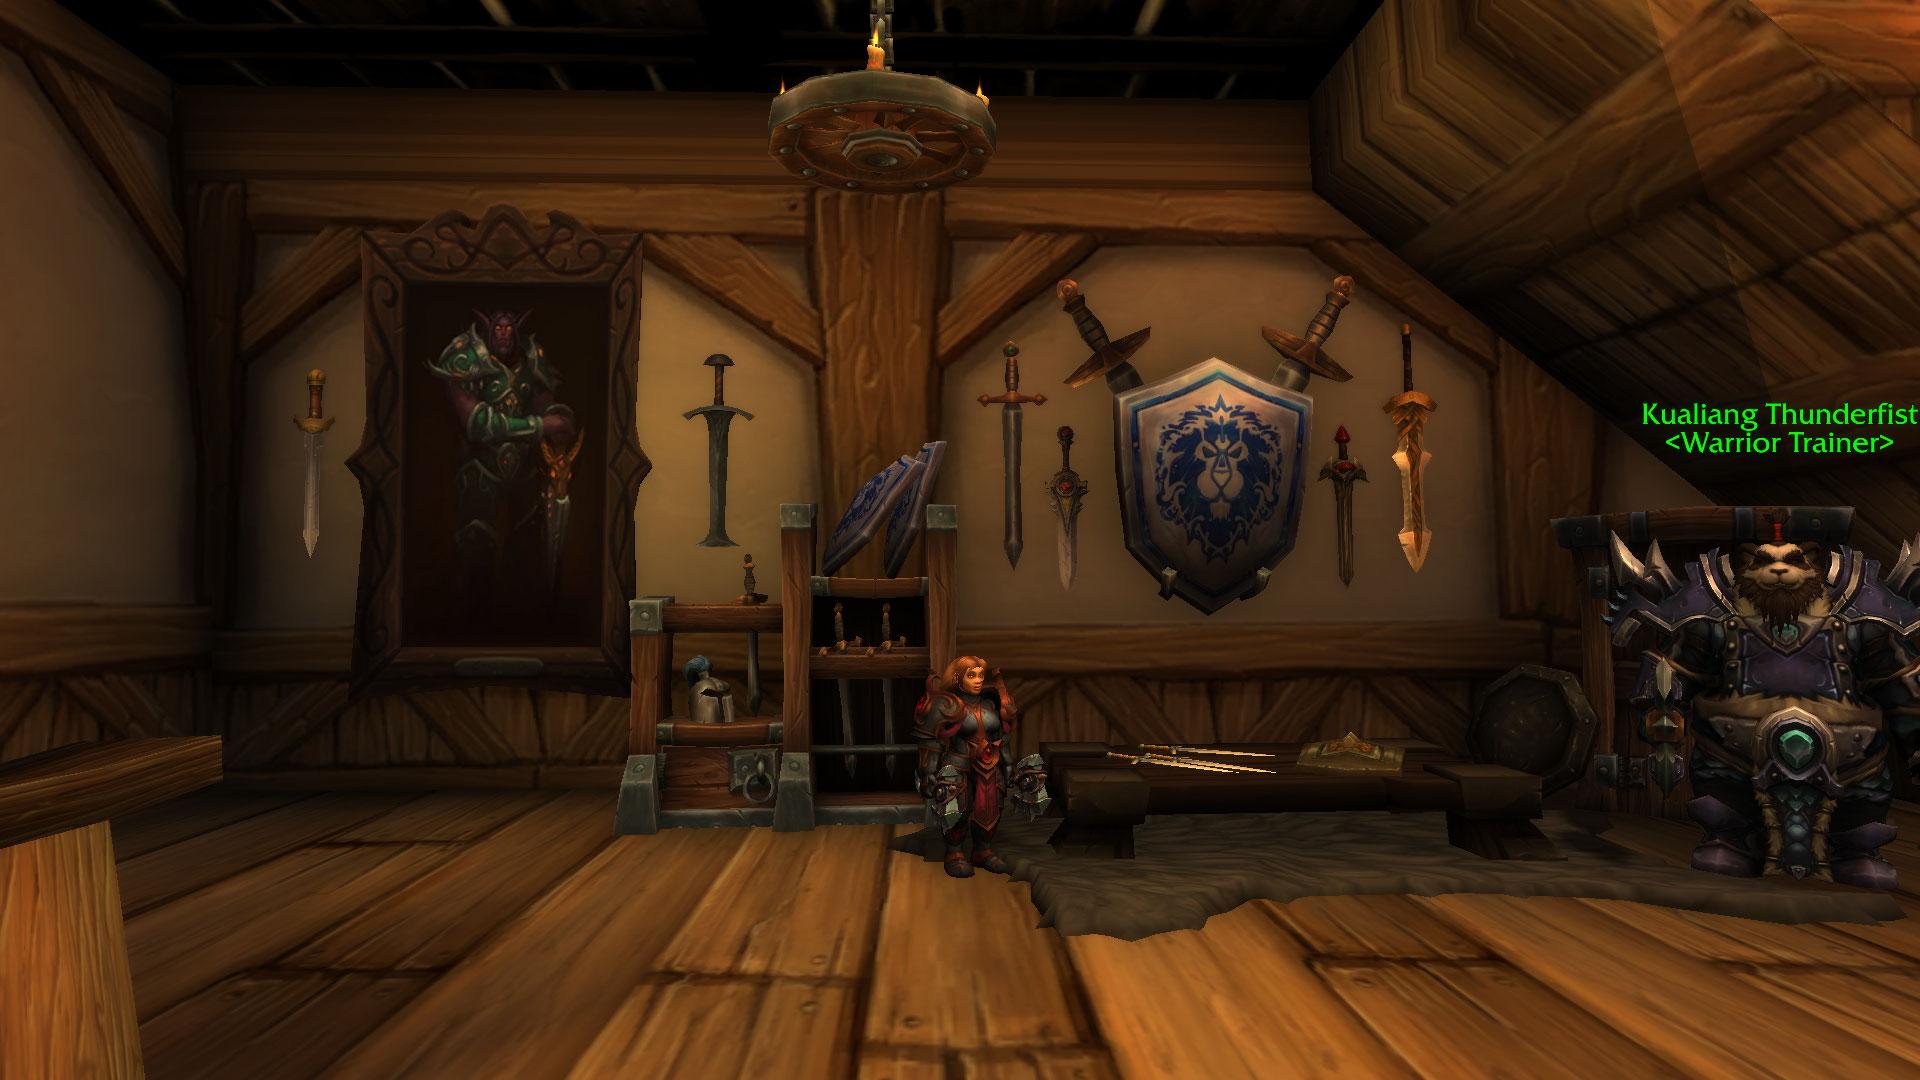 The Stormwind Portal Room has also been updated with a portal that leads to...